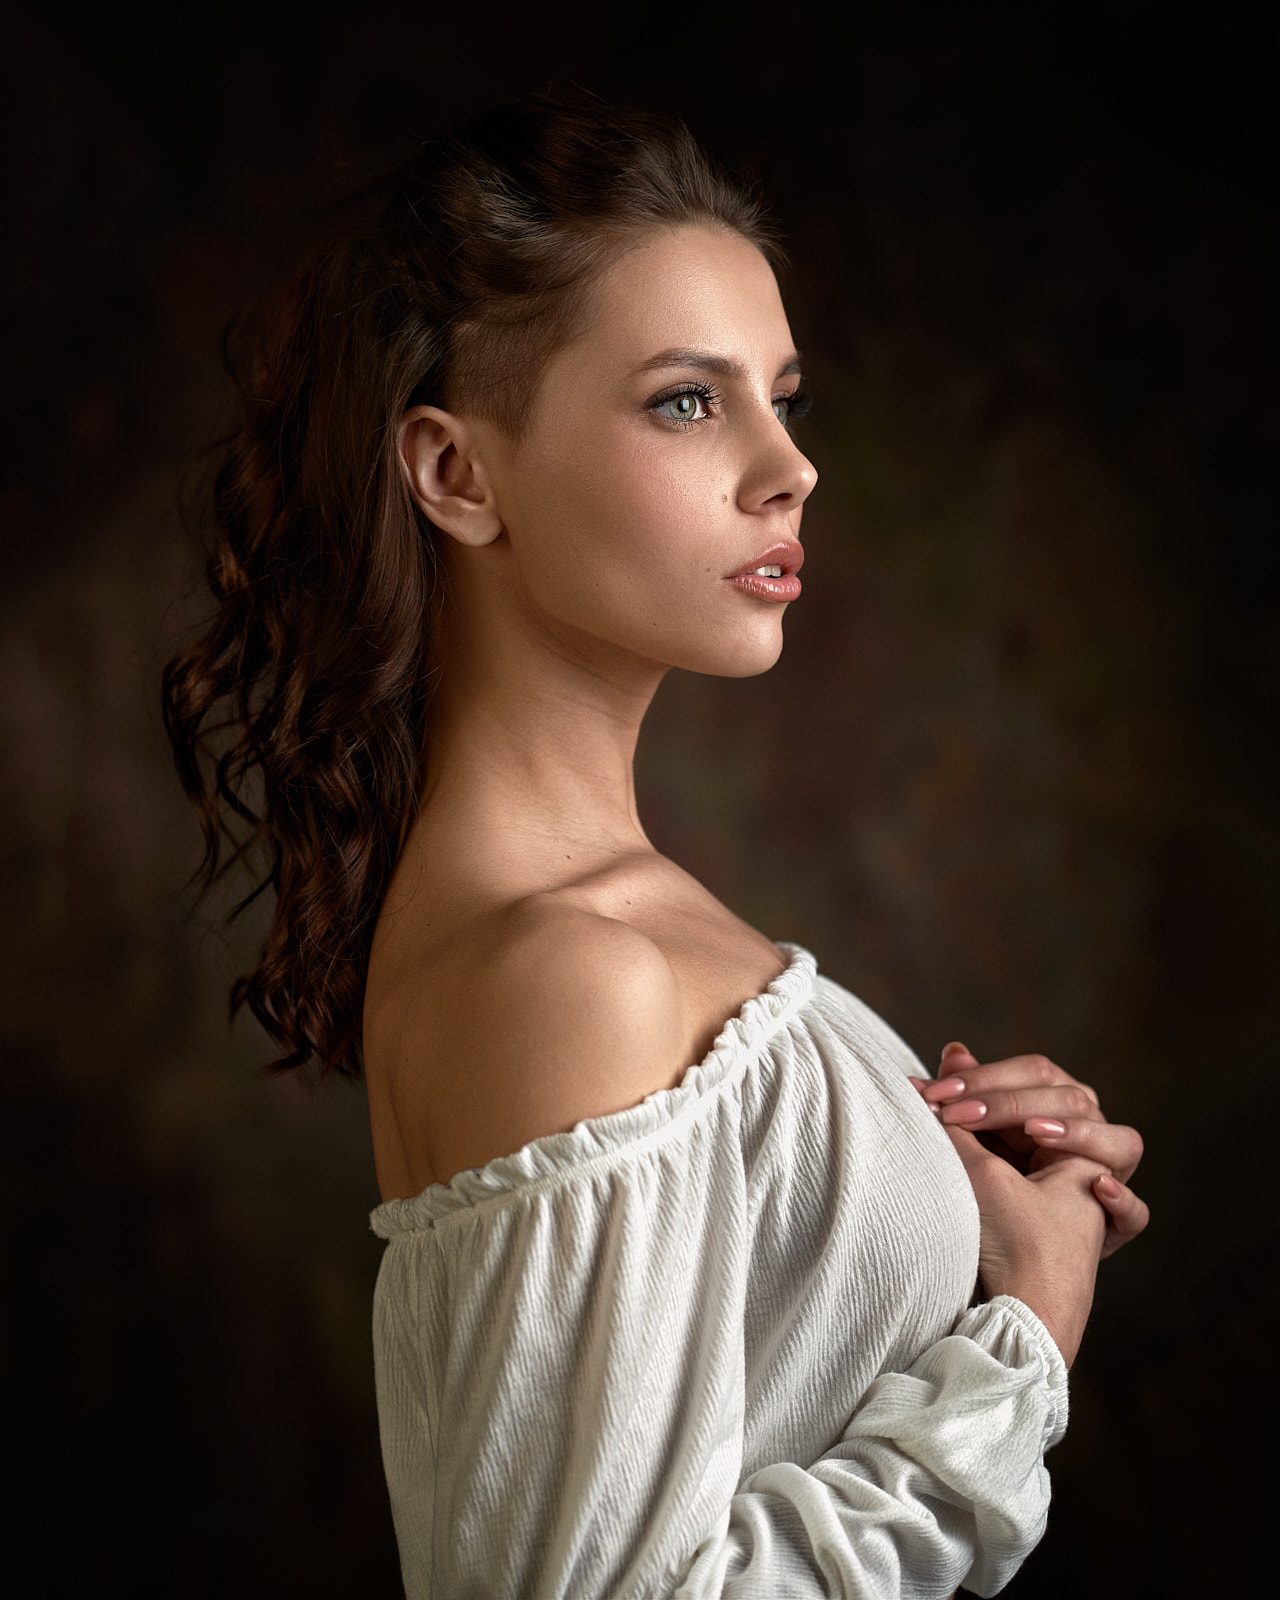 Max Pyzhik Women Maria Rykova Brunette Looking Away Bare Shoulders White Clothing Simple Background 1280x1600